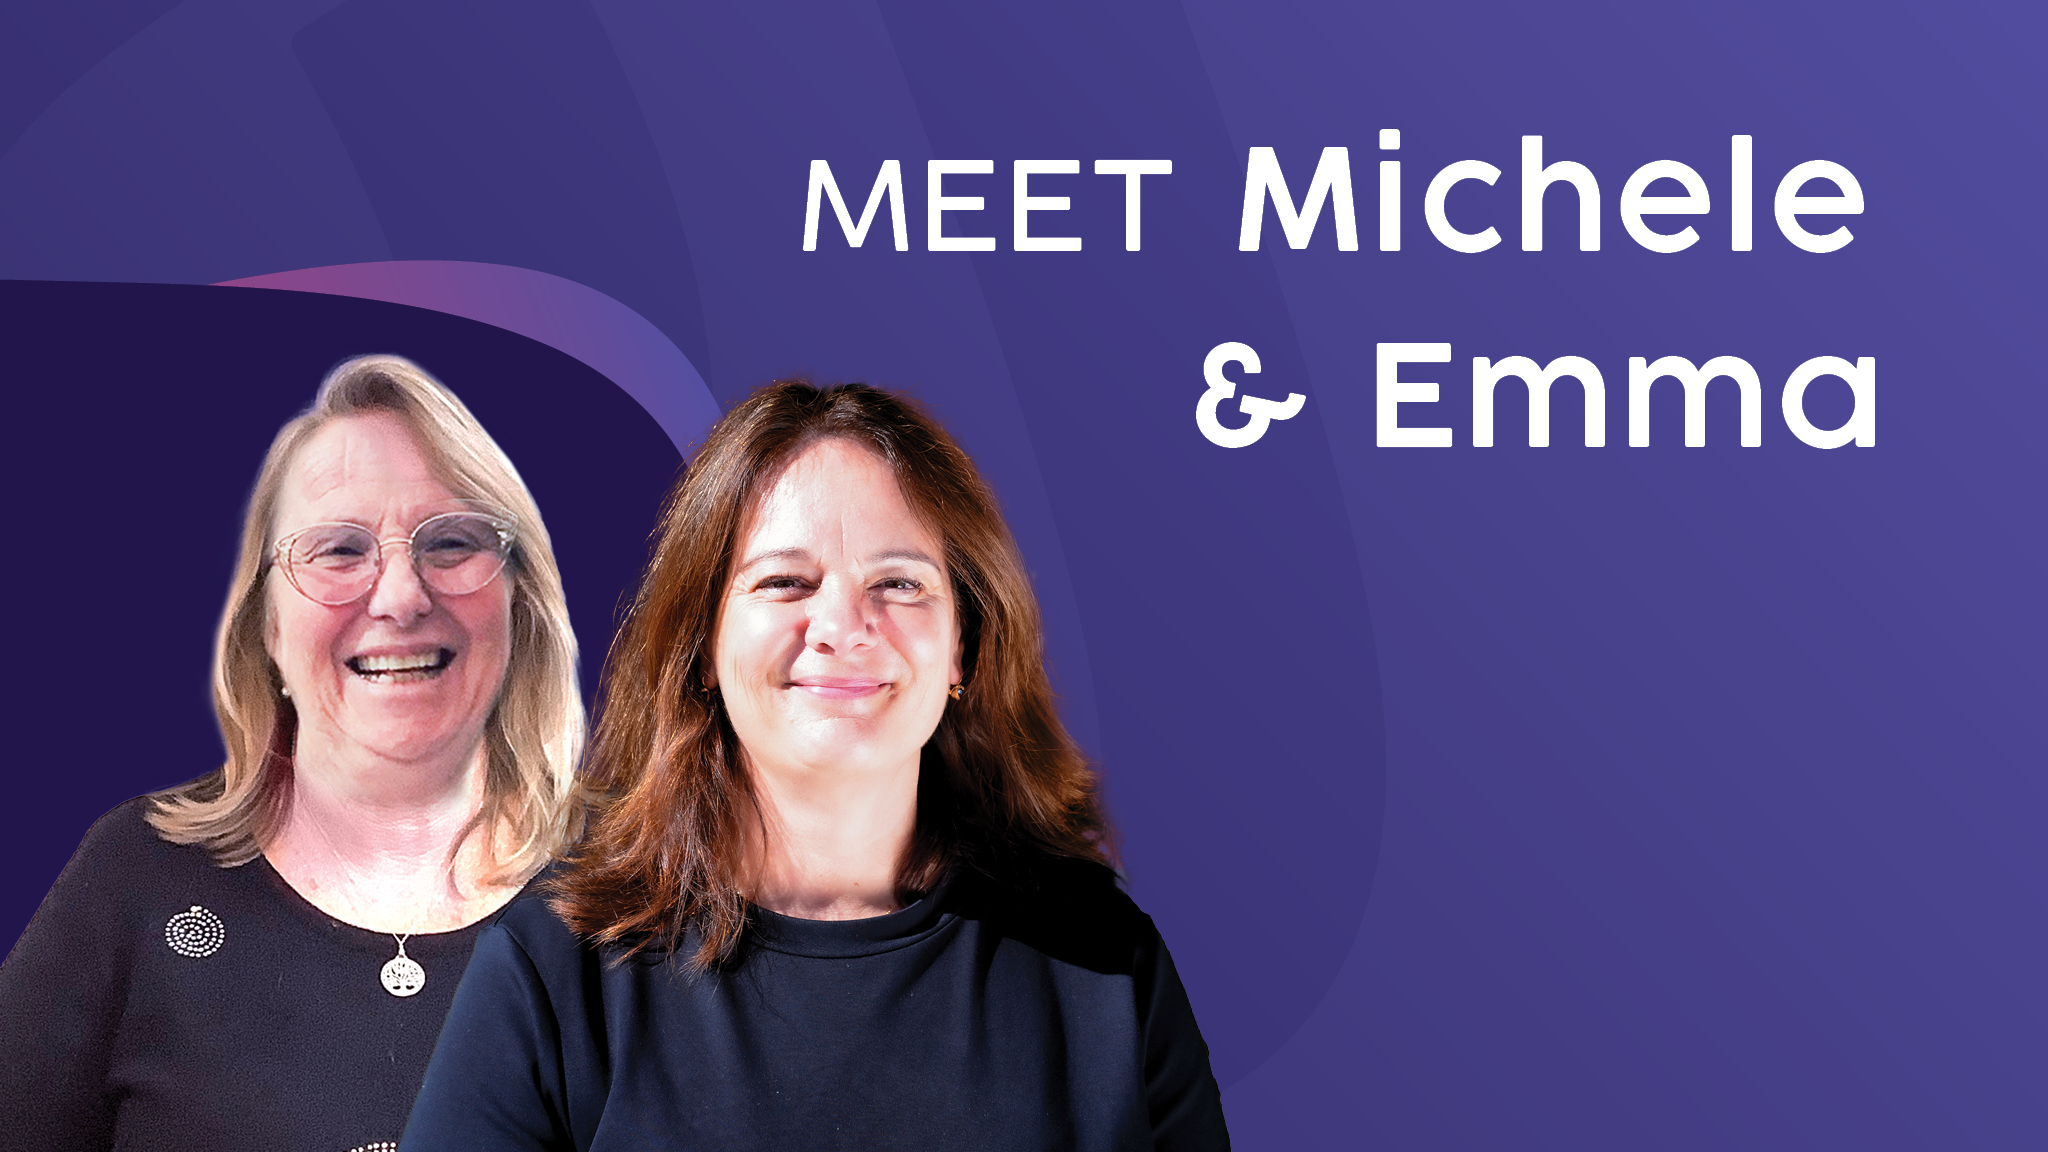 Photo of Rocky Bay staff member Emma and Michele with the text 'Meet Michele & Emma'